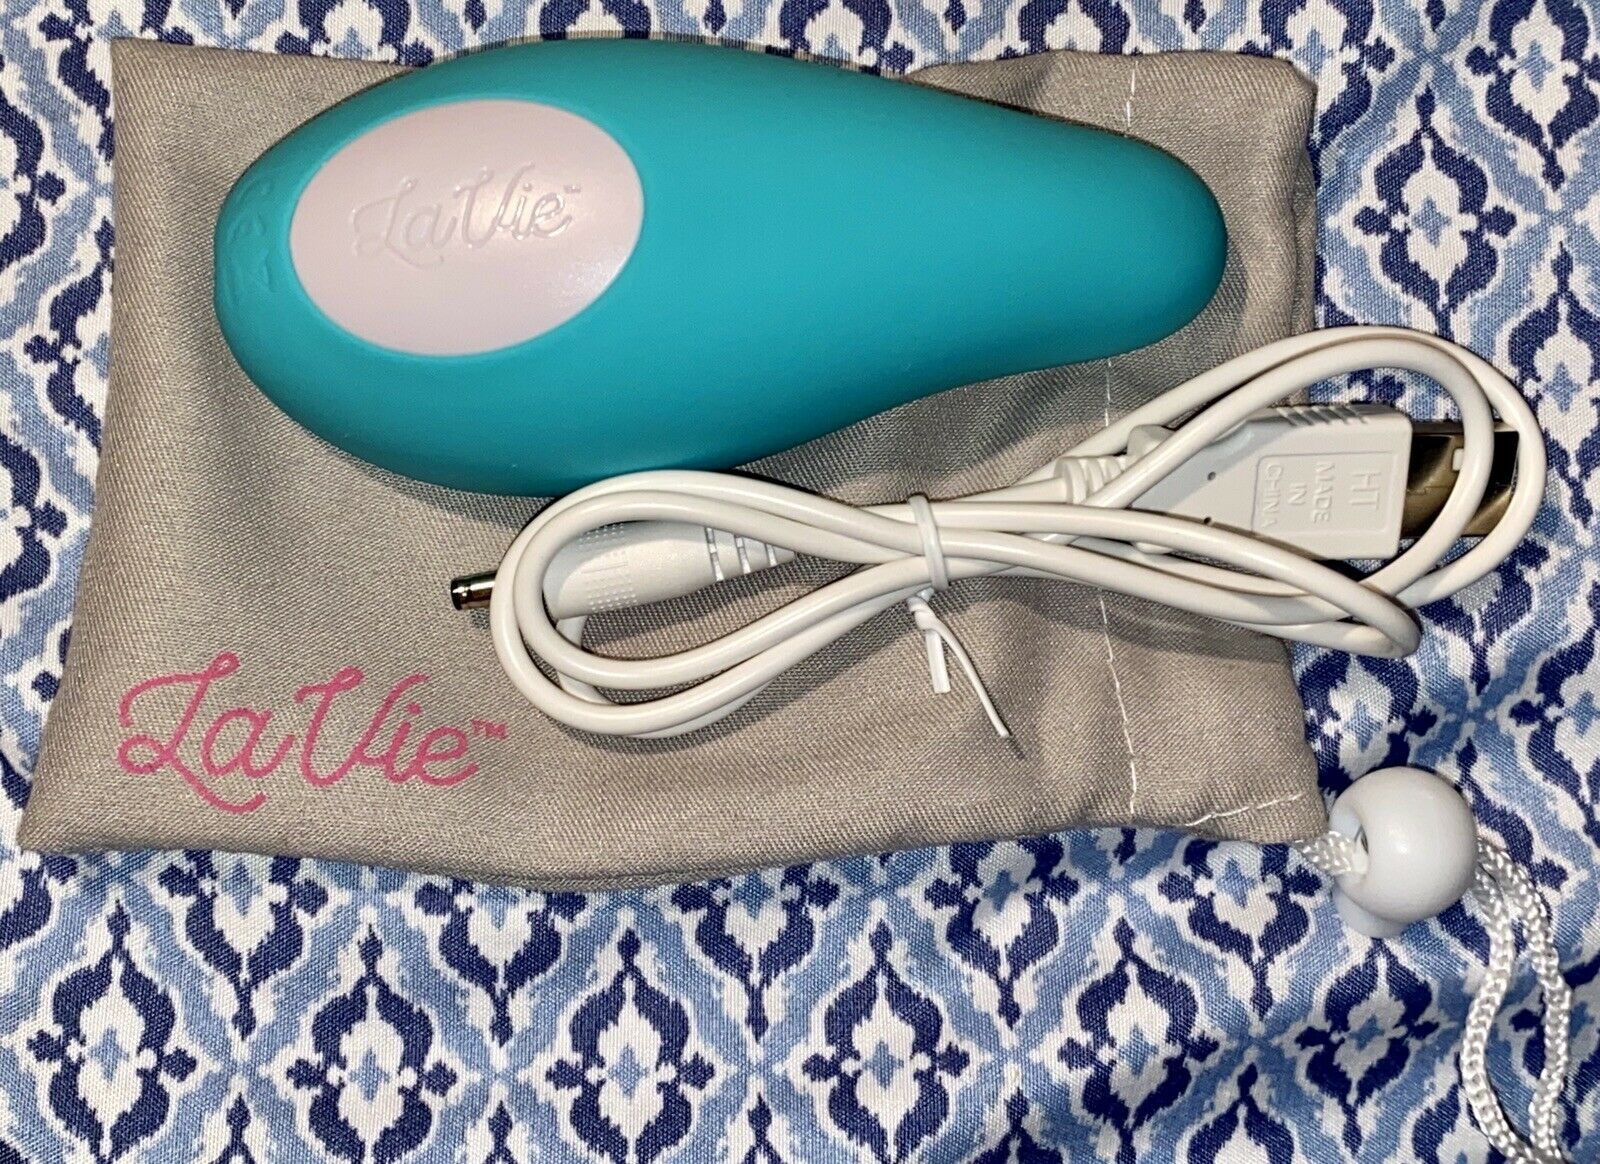 LaVie Lactation Massage Breastfeeding Vibrator with Cord Teal Clogged Duct Help